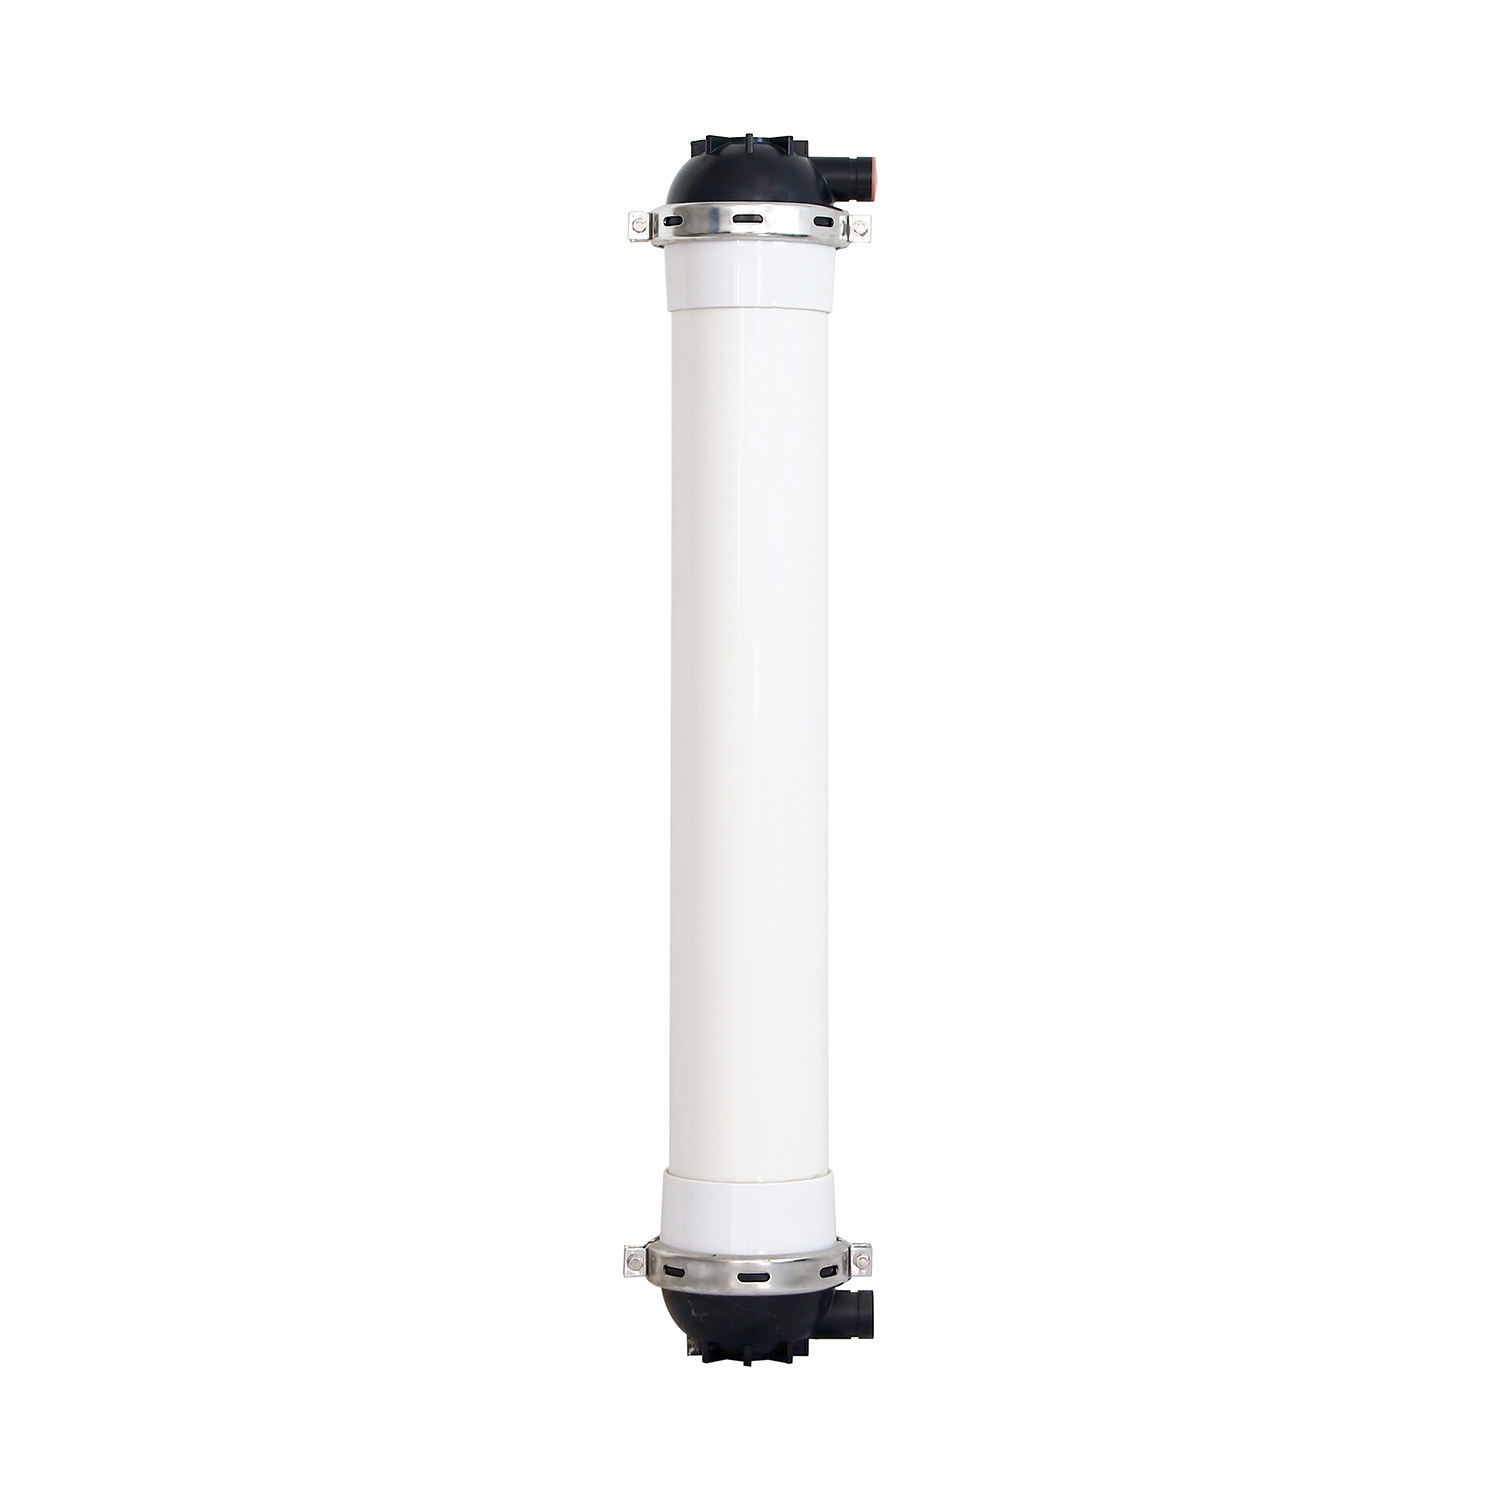 Hollow Fiber Ultrafiltration Membrane 8060 PVDF UF Membrane for Wastewater Purification 